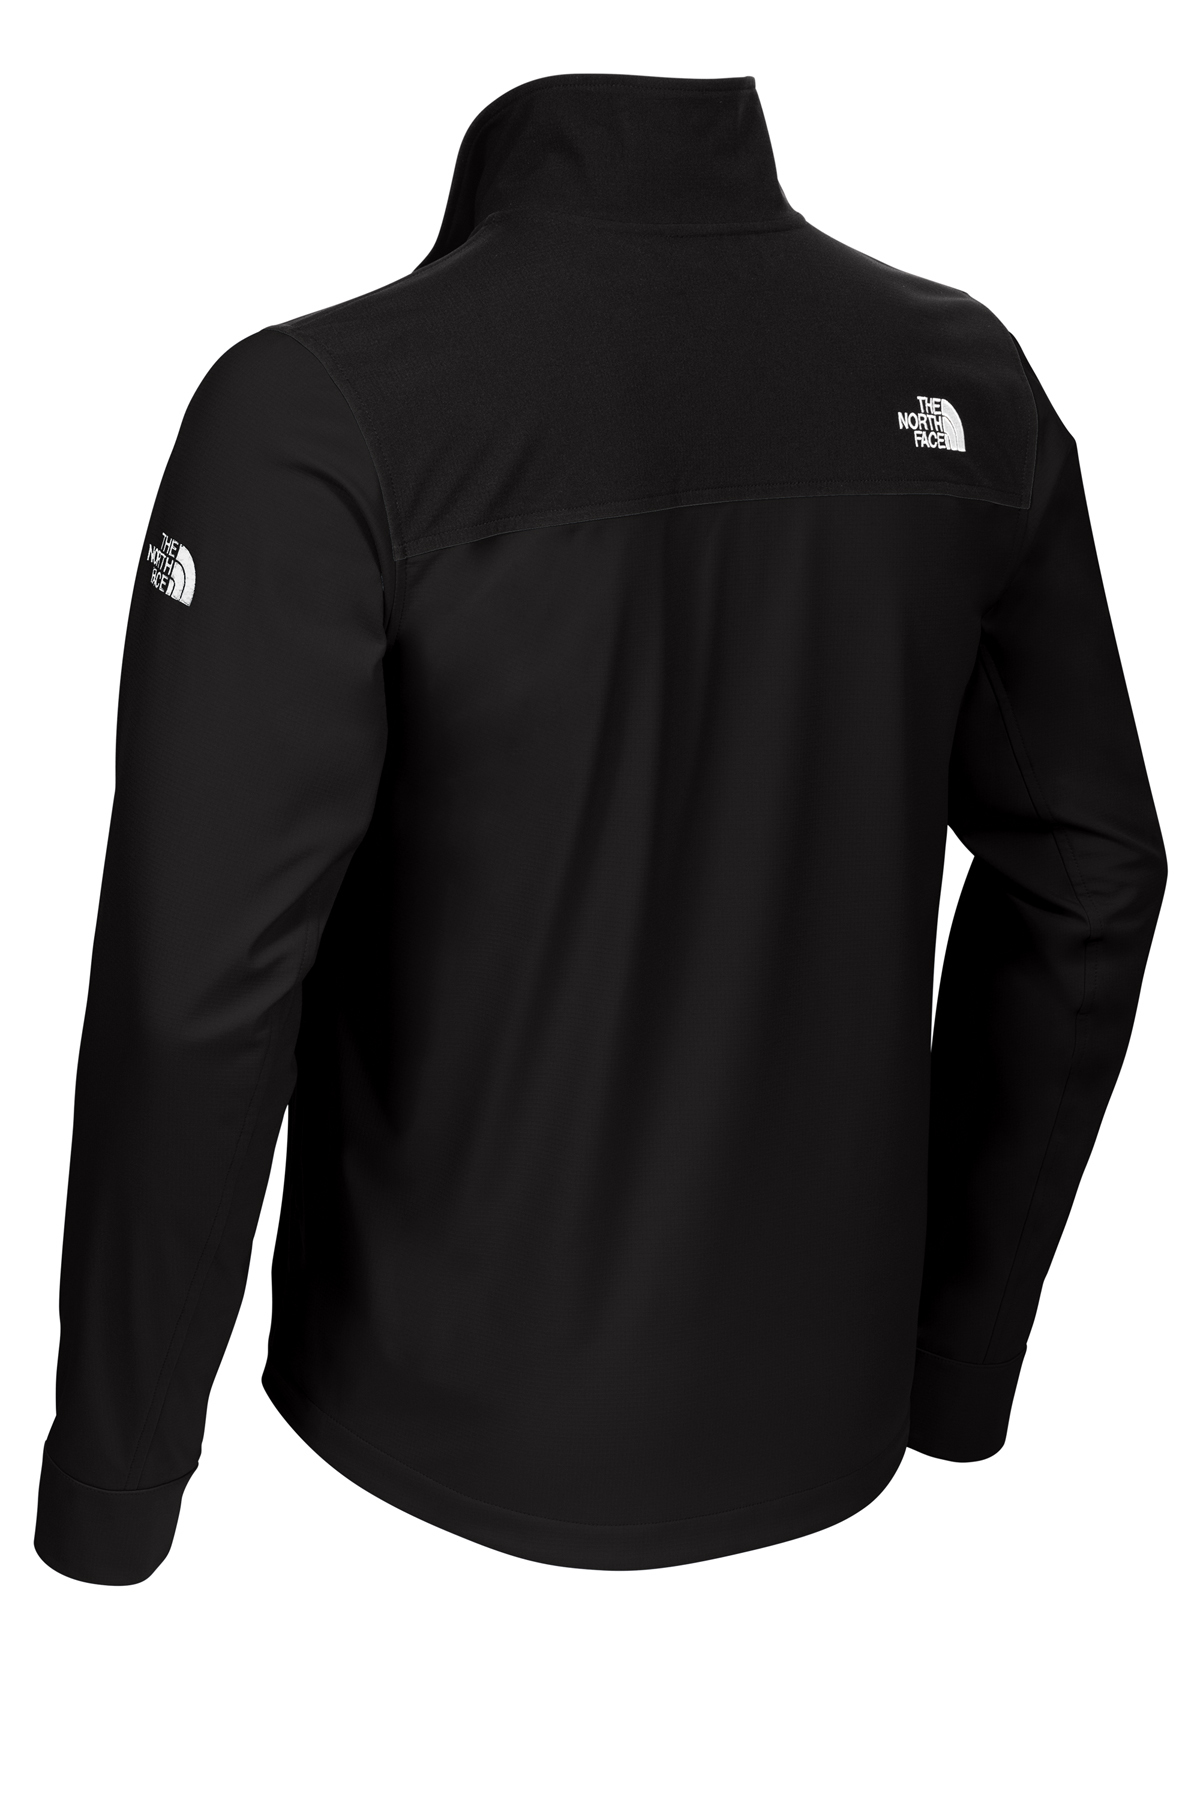 The North Face Castle Rock Soft Shell Jacket | Product | SanMar